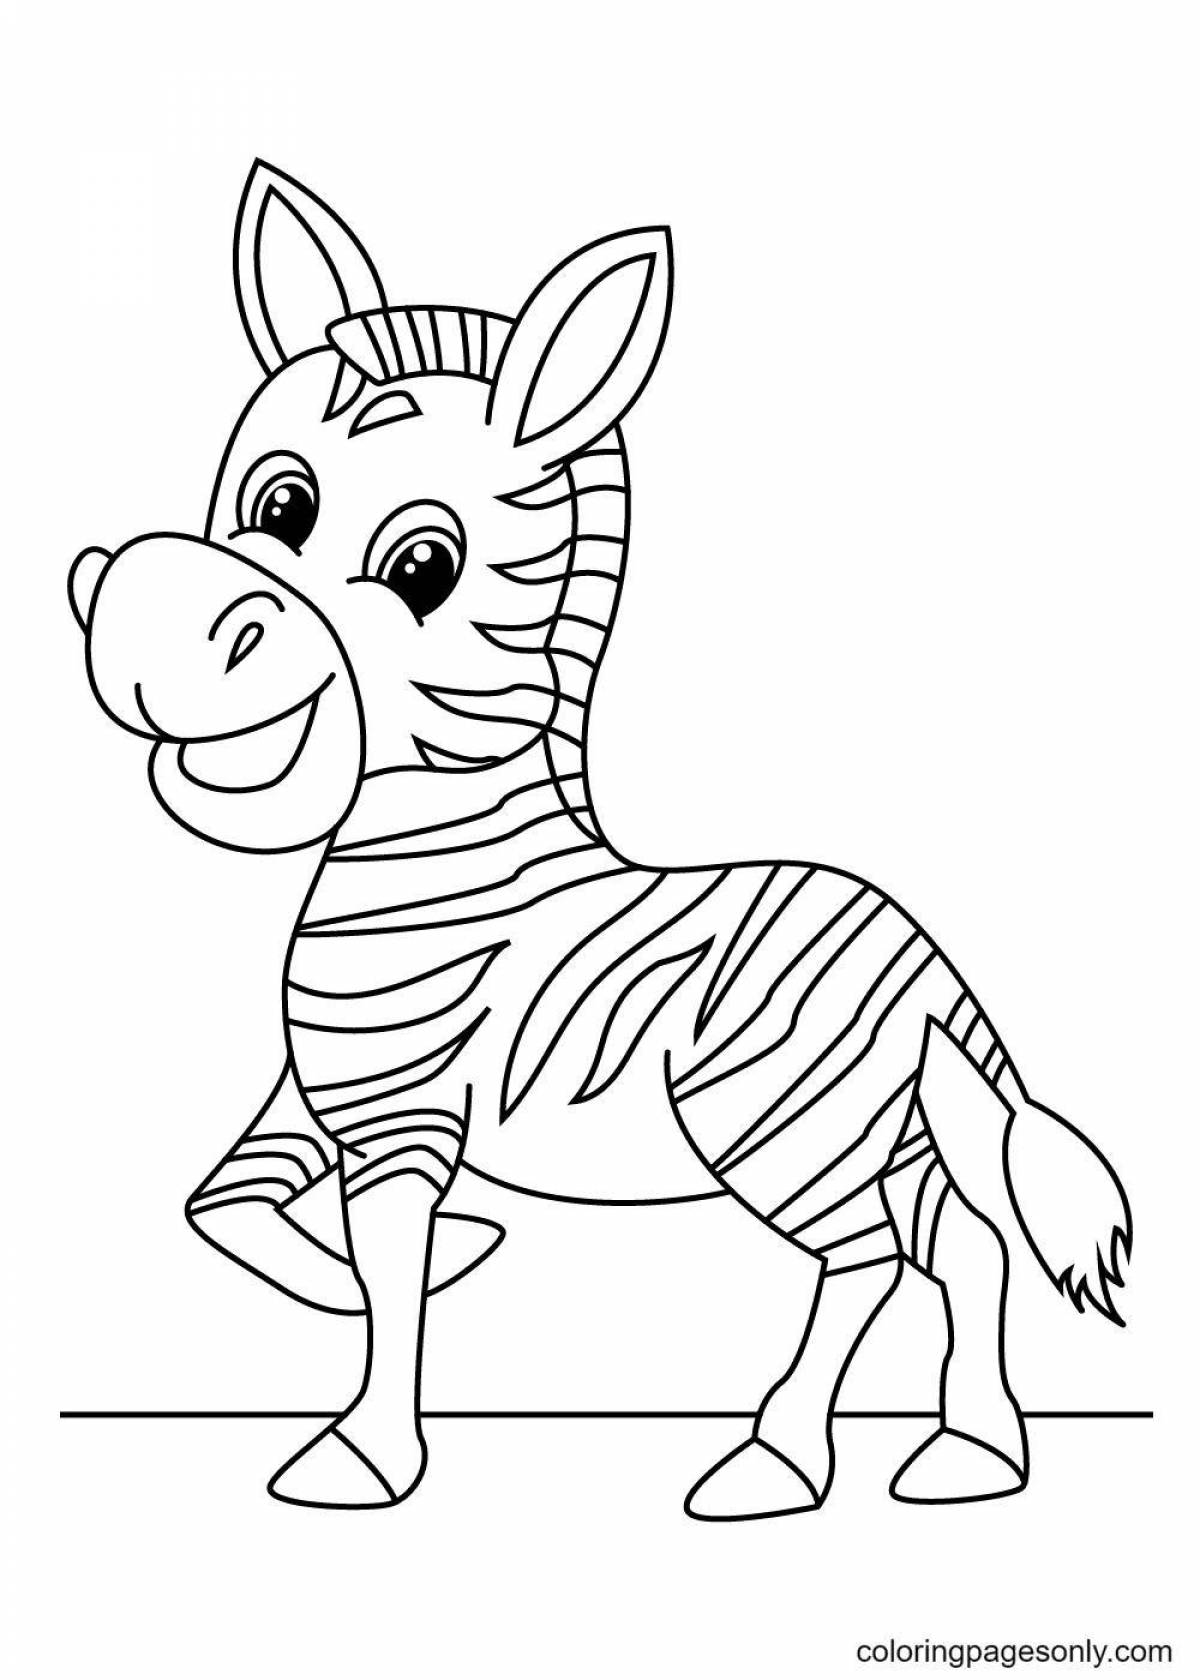 Coloring zebra with colorful splashes for kids